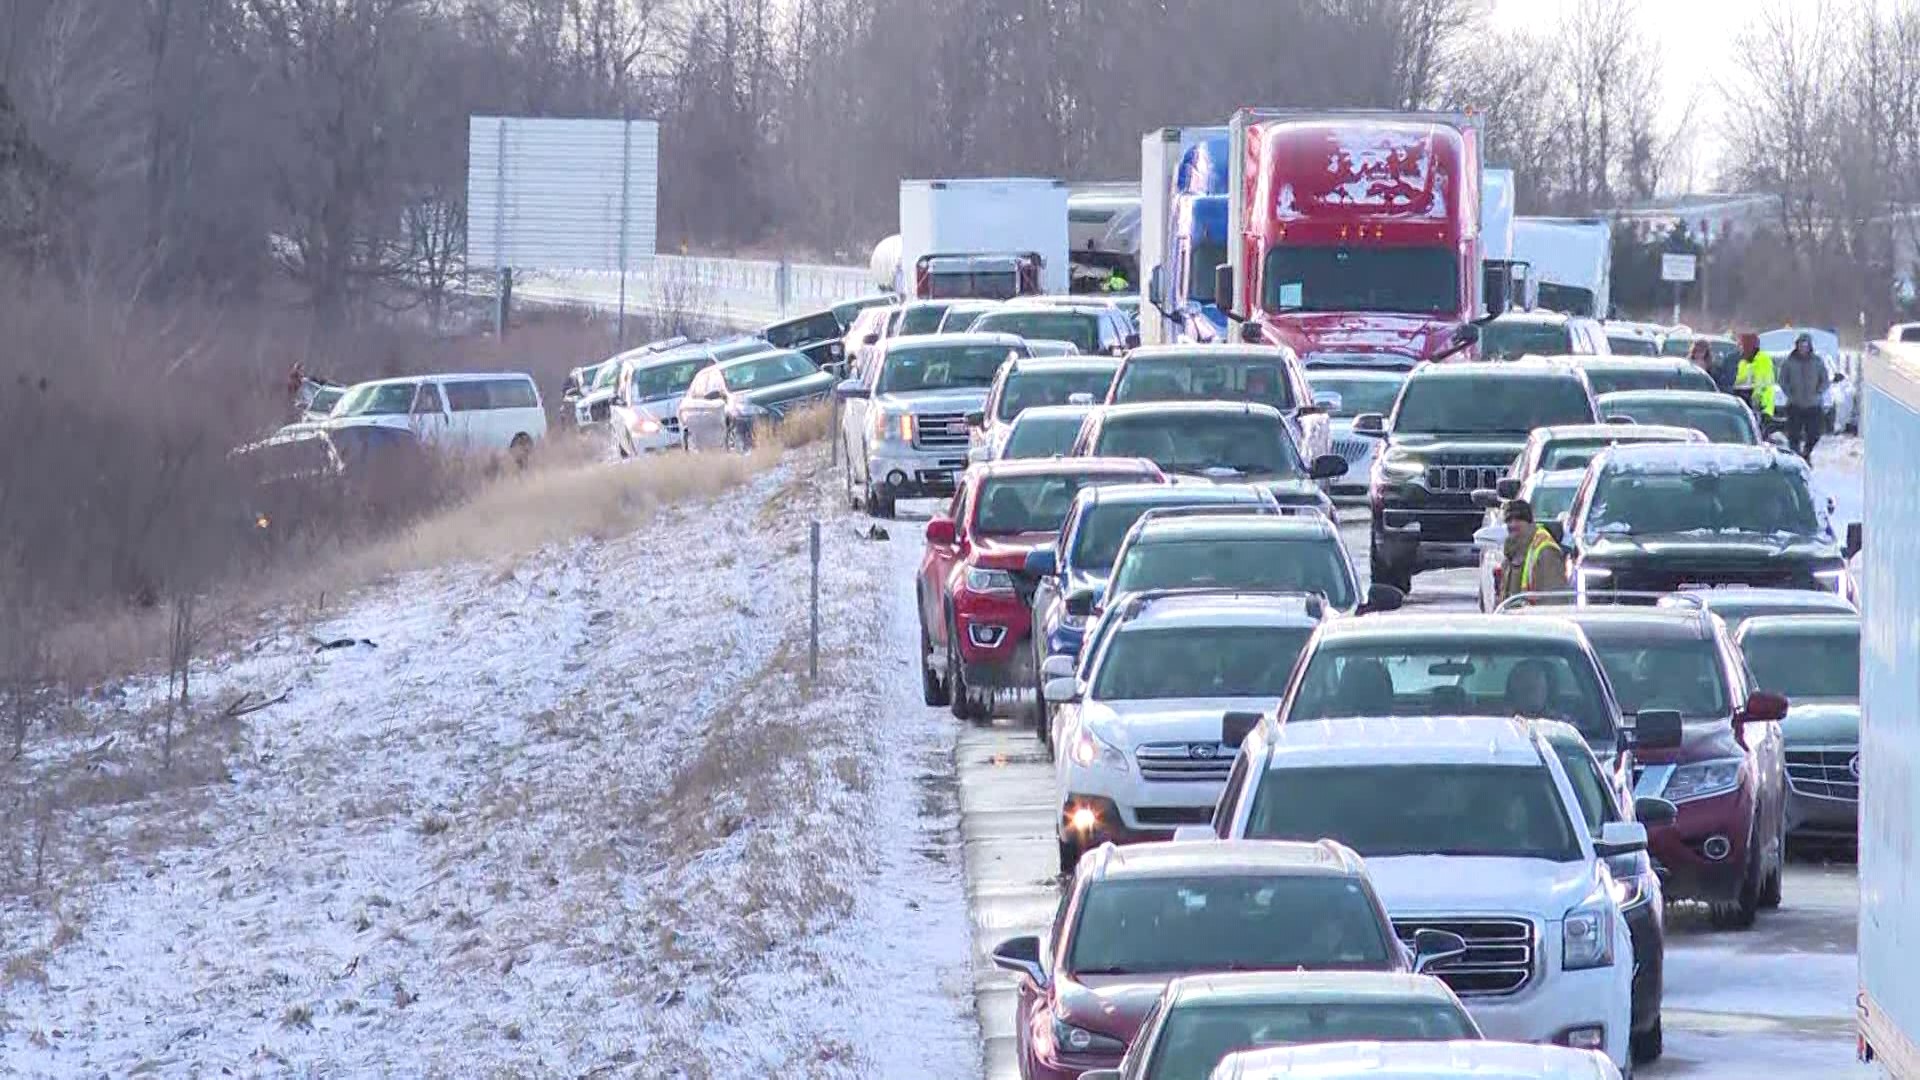 Thanks to local residents, relief efforts surrounding the 80-90 car pileup on I-96 near Portland Township took mere hours to accomplish.